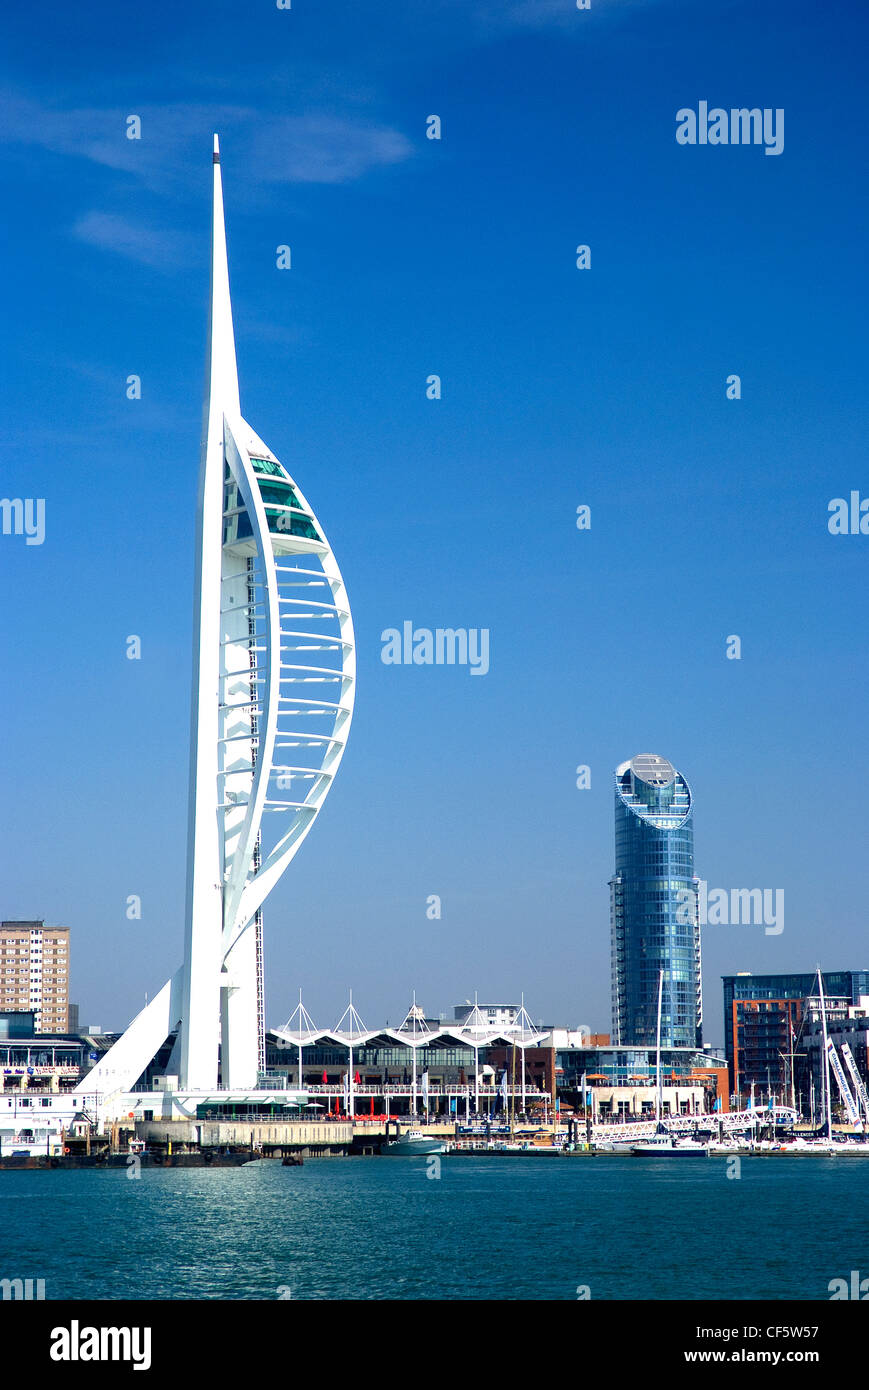 The 170m high Spinnaker Tower on the waterfront at Gunwharf Quays in Portsmouth Harbour. Stock Photo